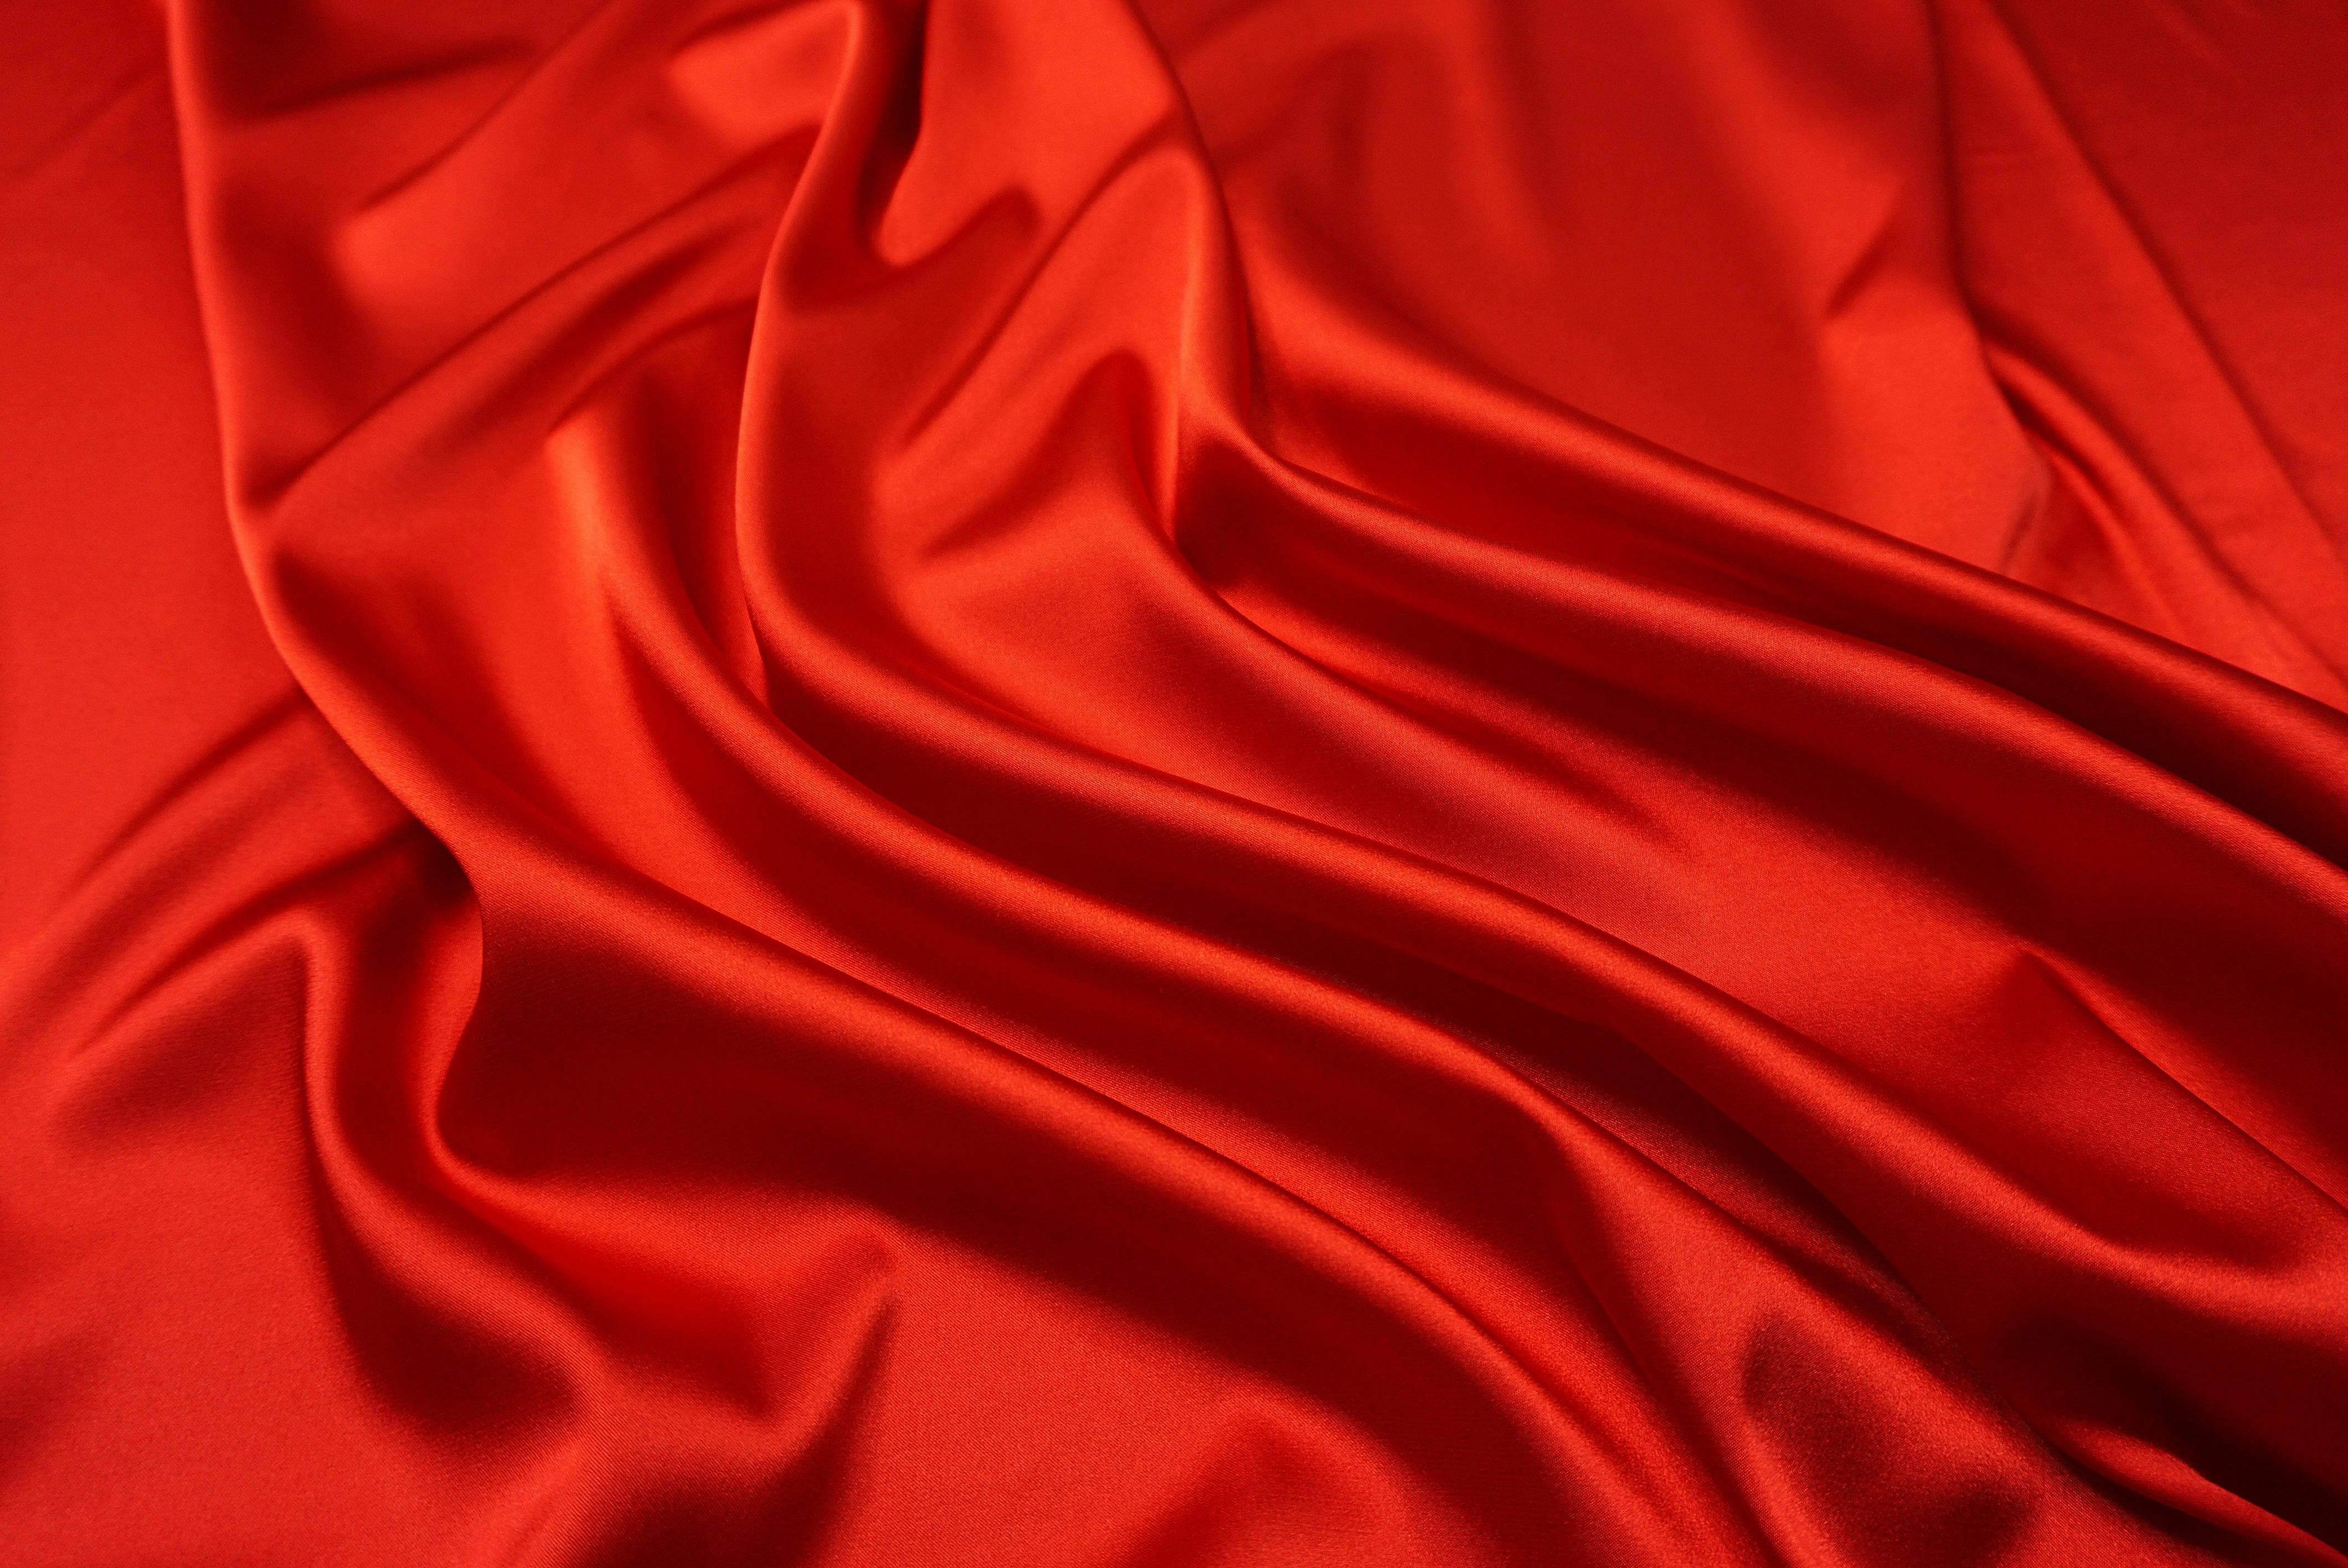 Ripples Red Fabric Free Stock Photo